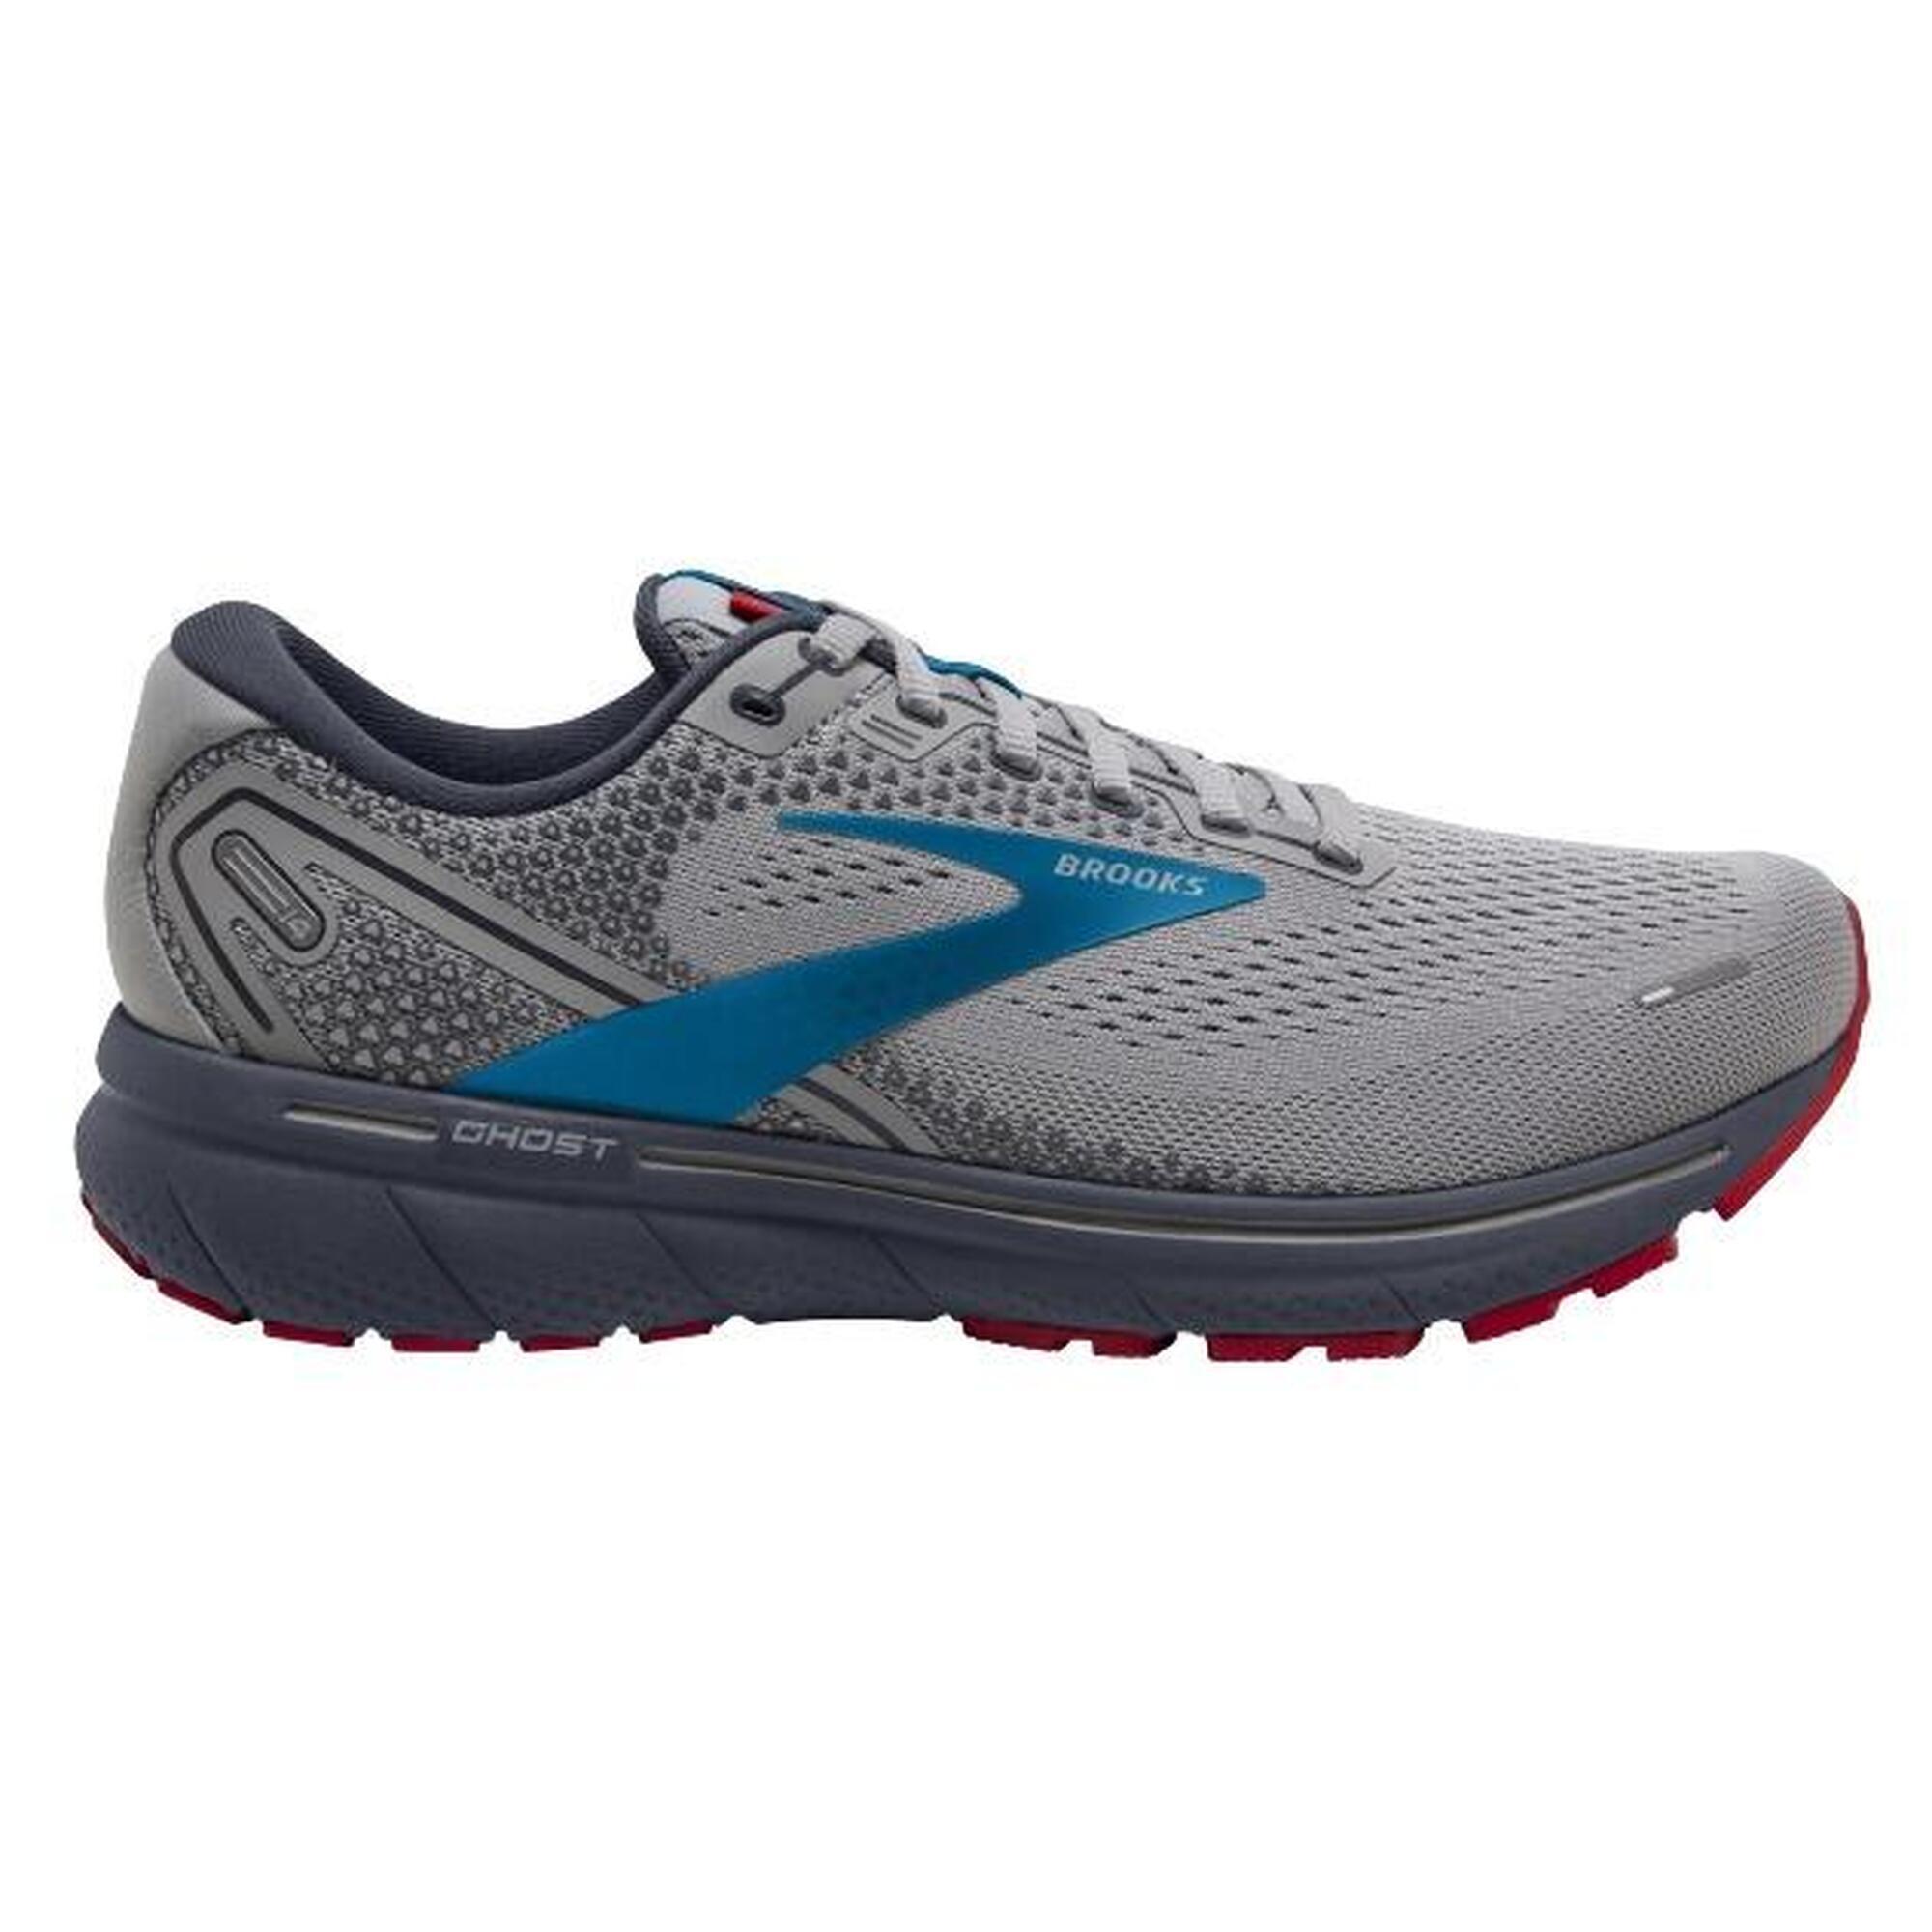 BROOKS Brooks Mens Ghost 14 Running Shoes Grey